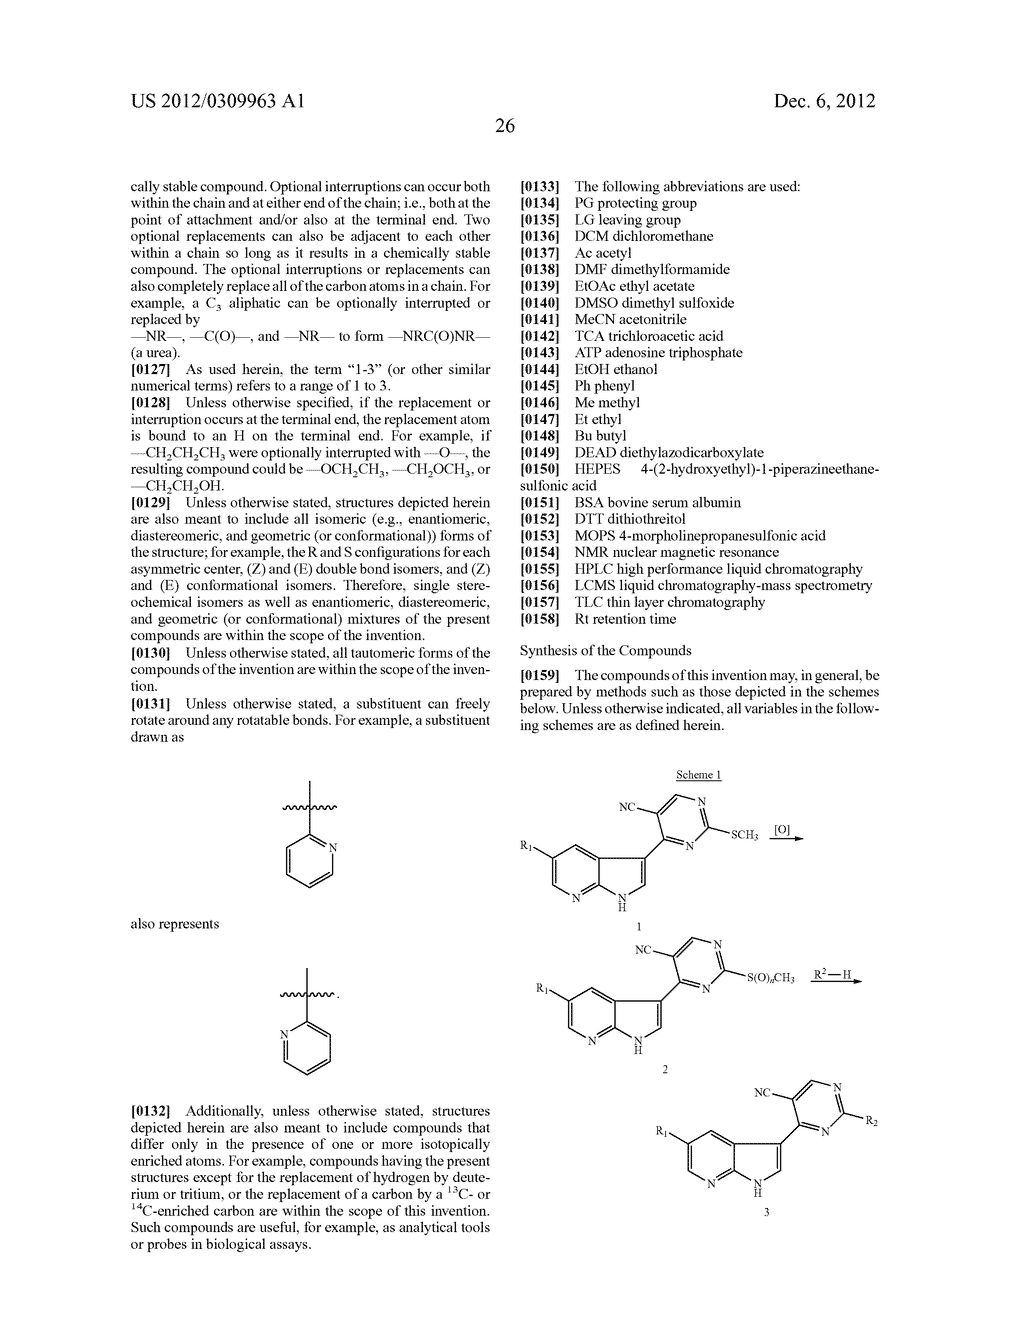 5-CYANO-4- (PYRROLO [2,3B] PYRIDINE-3-YL) -PYRIMIDINE DERIVATIVES USEFUL     AS PROTEIN KINASE INHIBITORS - diagram, schematic, and image 27